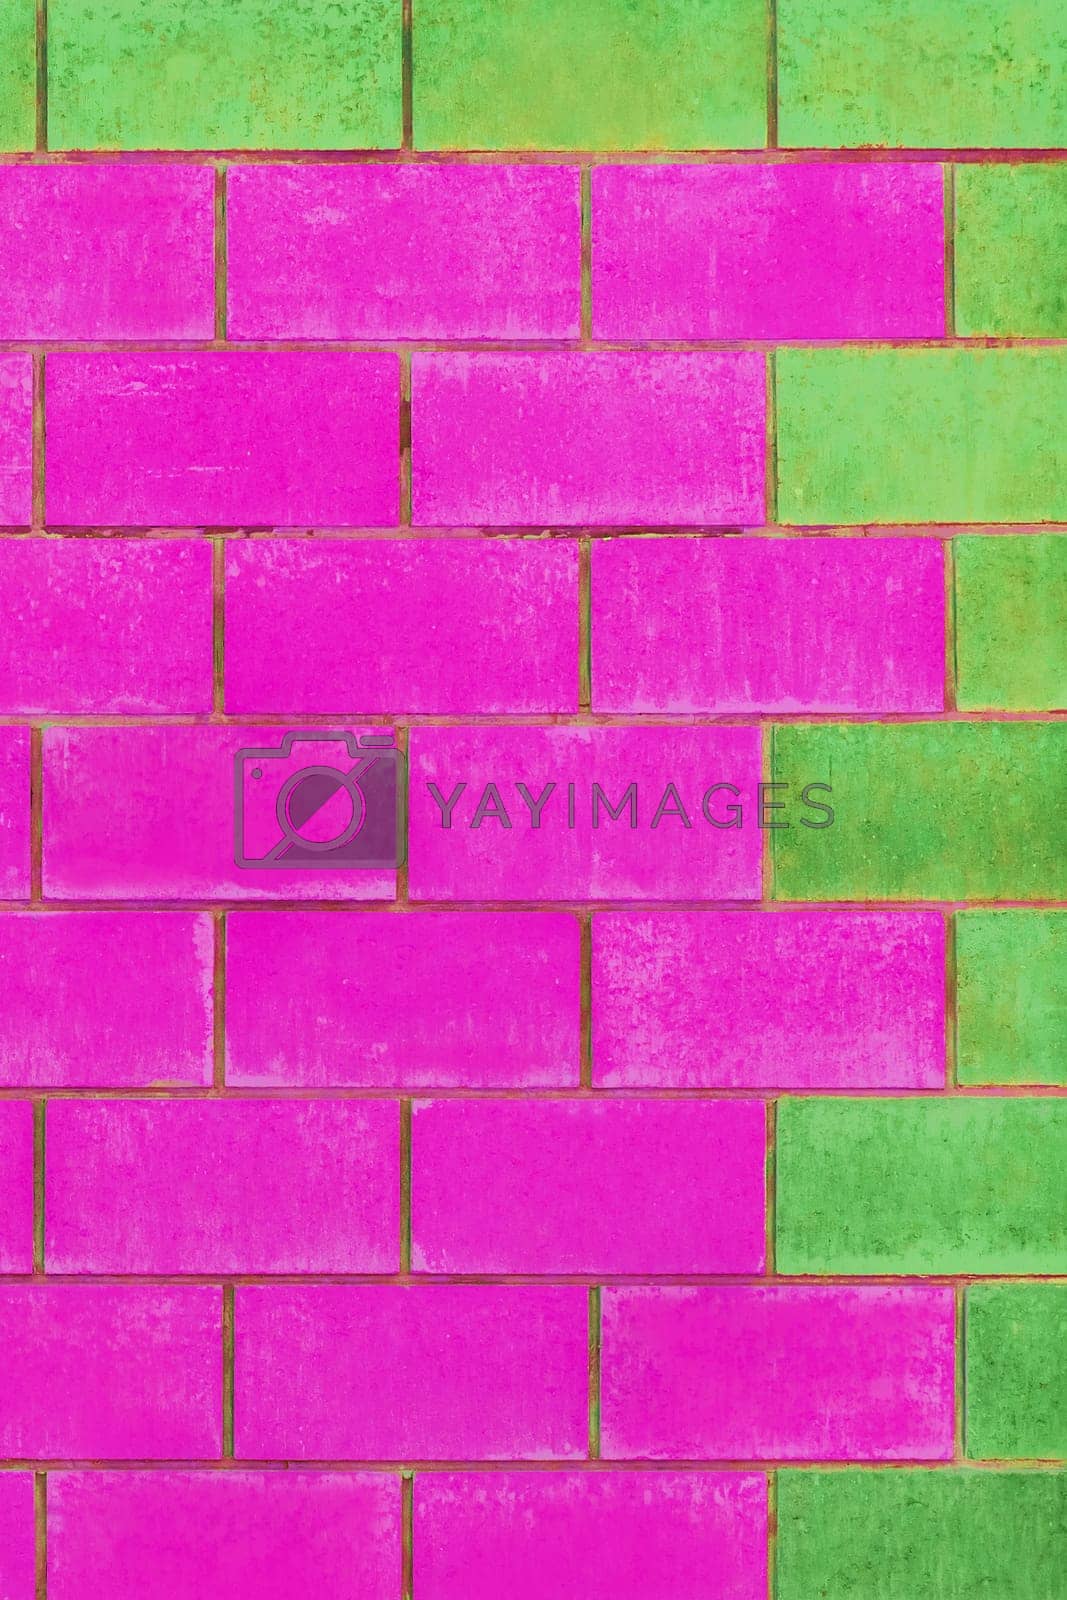 Royalty free image of Green and purple pink paint on brick blocks urban color vibrant design wall texture background architecture by AYDO8